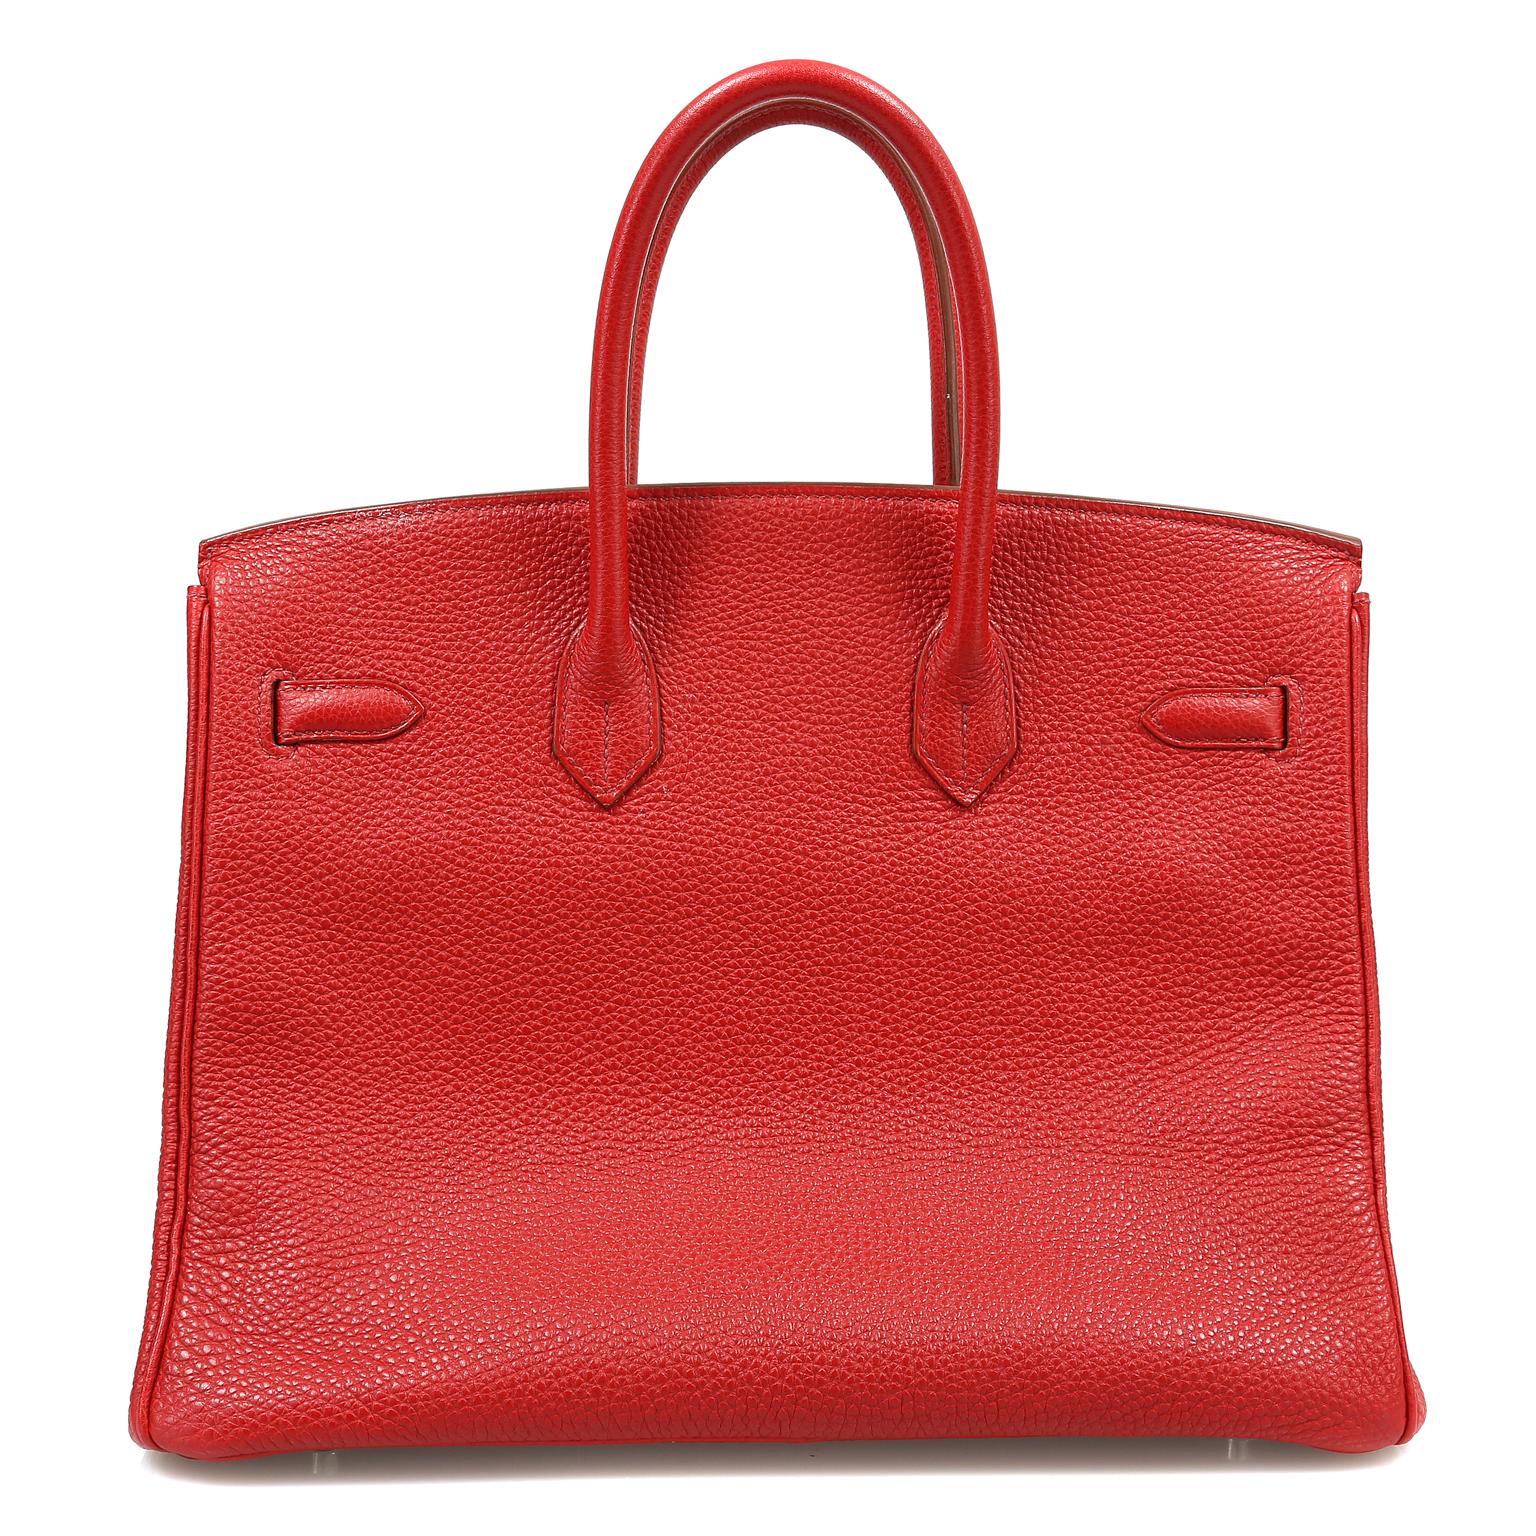 This authentic Hermès Red Togo 35 cm Birkin is in better than excellent condition.    Hand stitched by skilled craftsmen, wait lists of a year or more are common for the Hermès Birkin. They are considered the ultimate in luxury fashion. Iconic